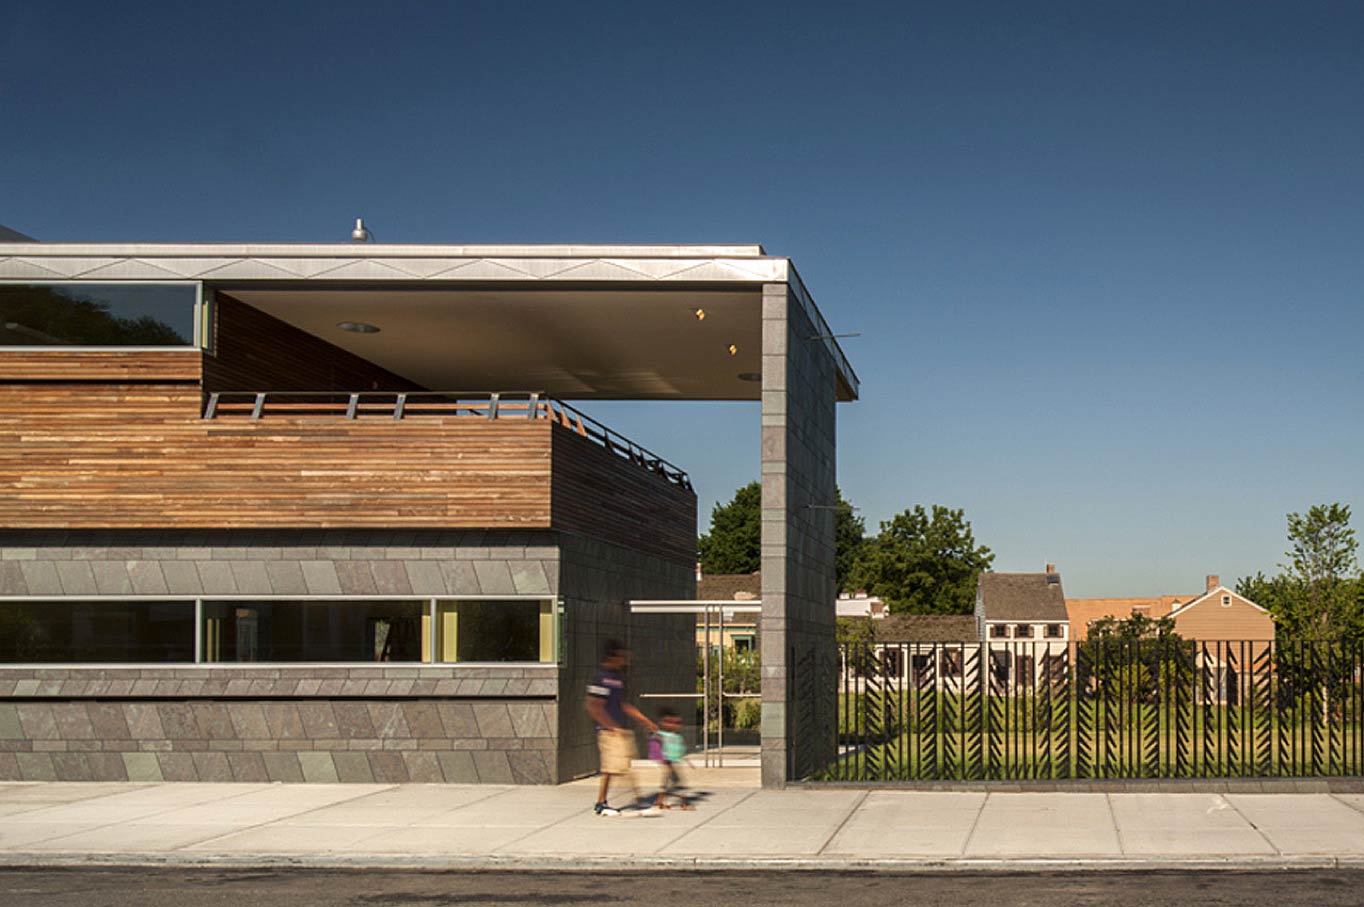 Brooklyn’s Weeksville Heritage Center, completed in 2013 with more than $35 million in capital funding from the City of New York, activates the community’s African-American history through vanguard and experimental programs. / Courtesy Caples Jefferson Architects